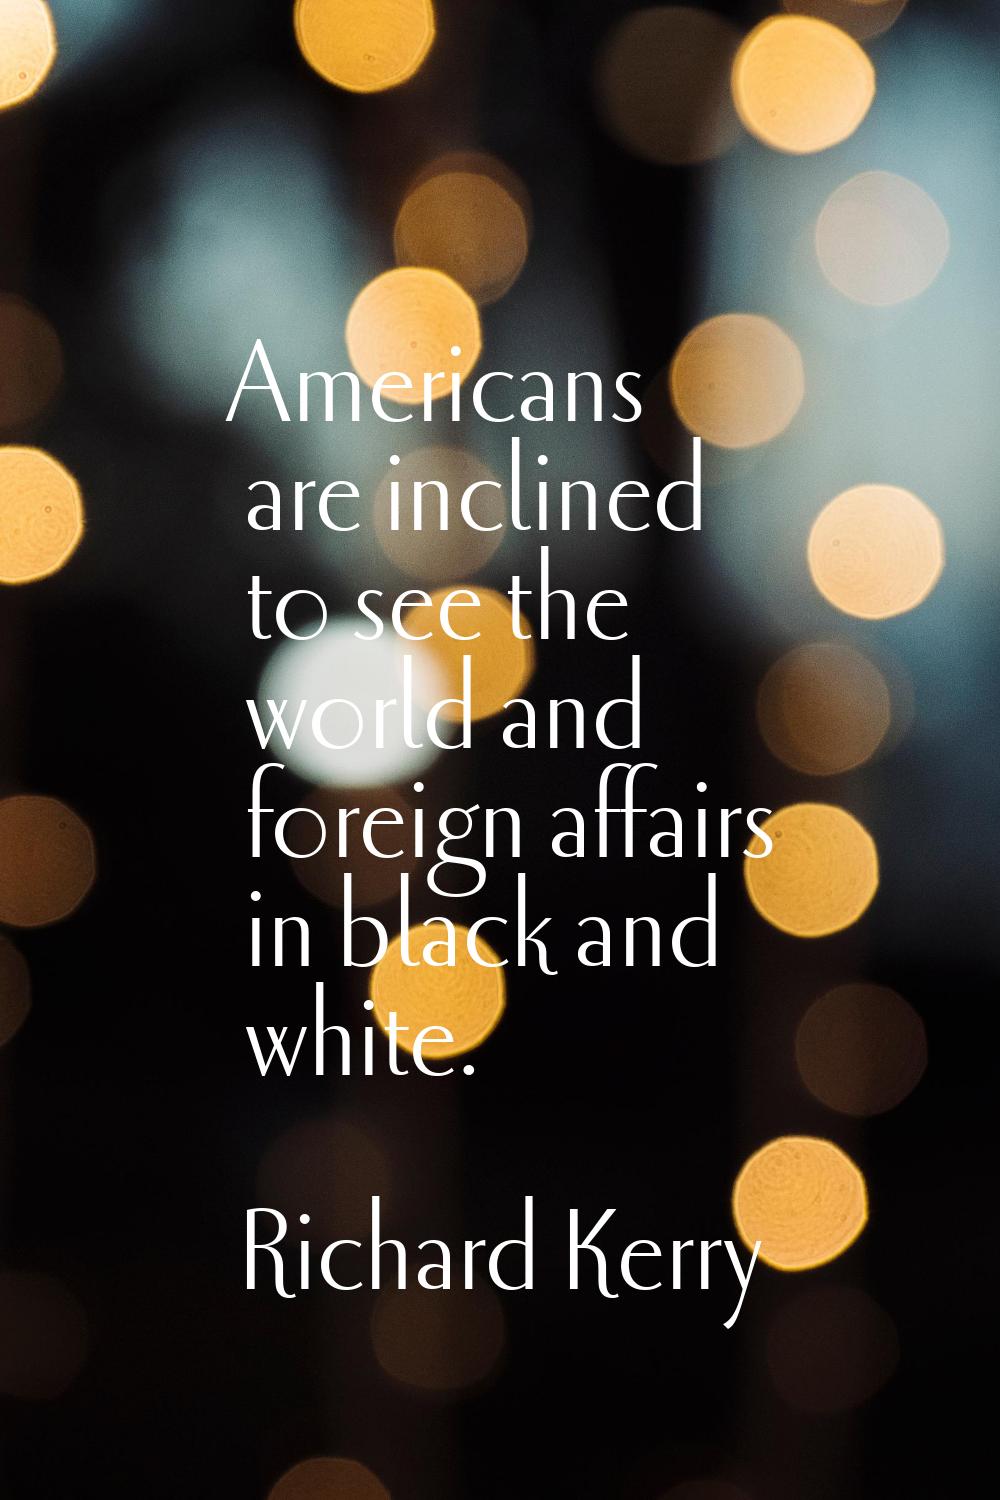 Americans are inclined to see the world and foreign affairs in black and white.